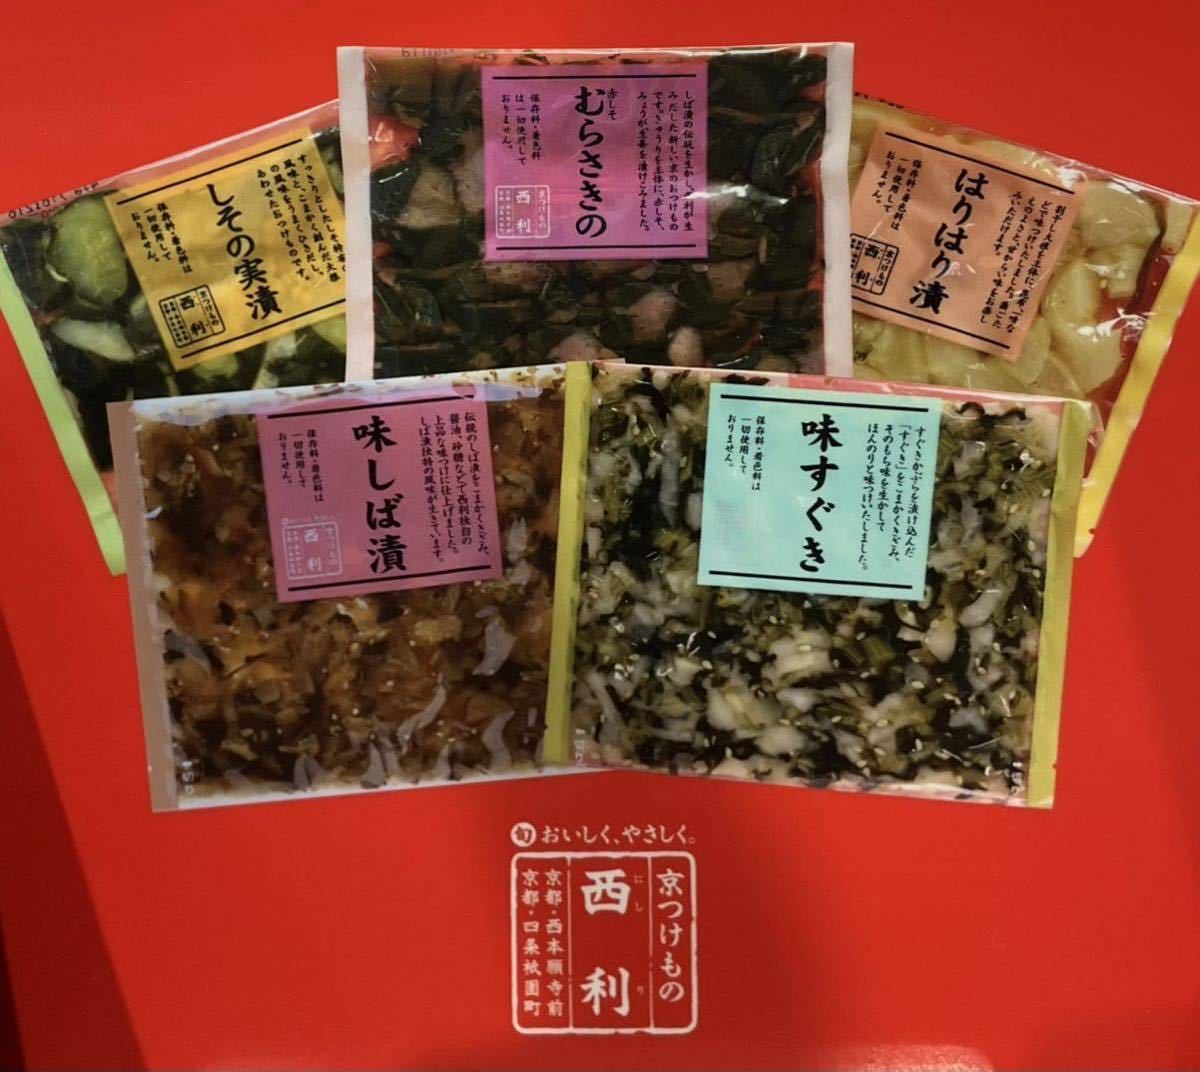  final price! capital attaching thing west profit taste. small sack 5 sack go in (...,. that real ., is . is .., immediately .) Kyoto old shop high class tsukemono pickles . earth production tsukemono pickles ... packing settled 